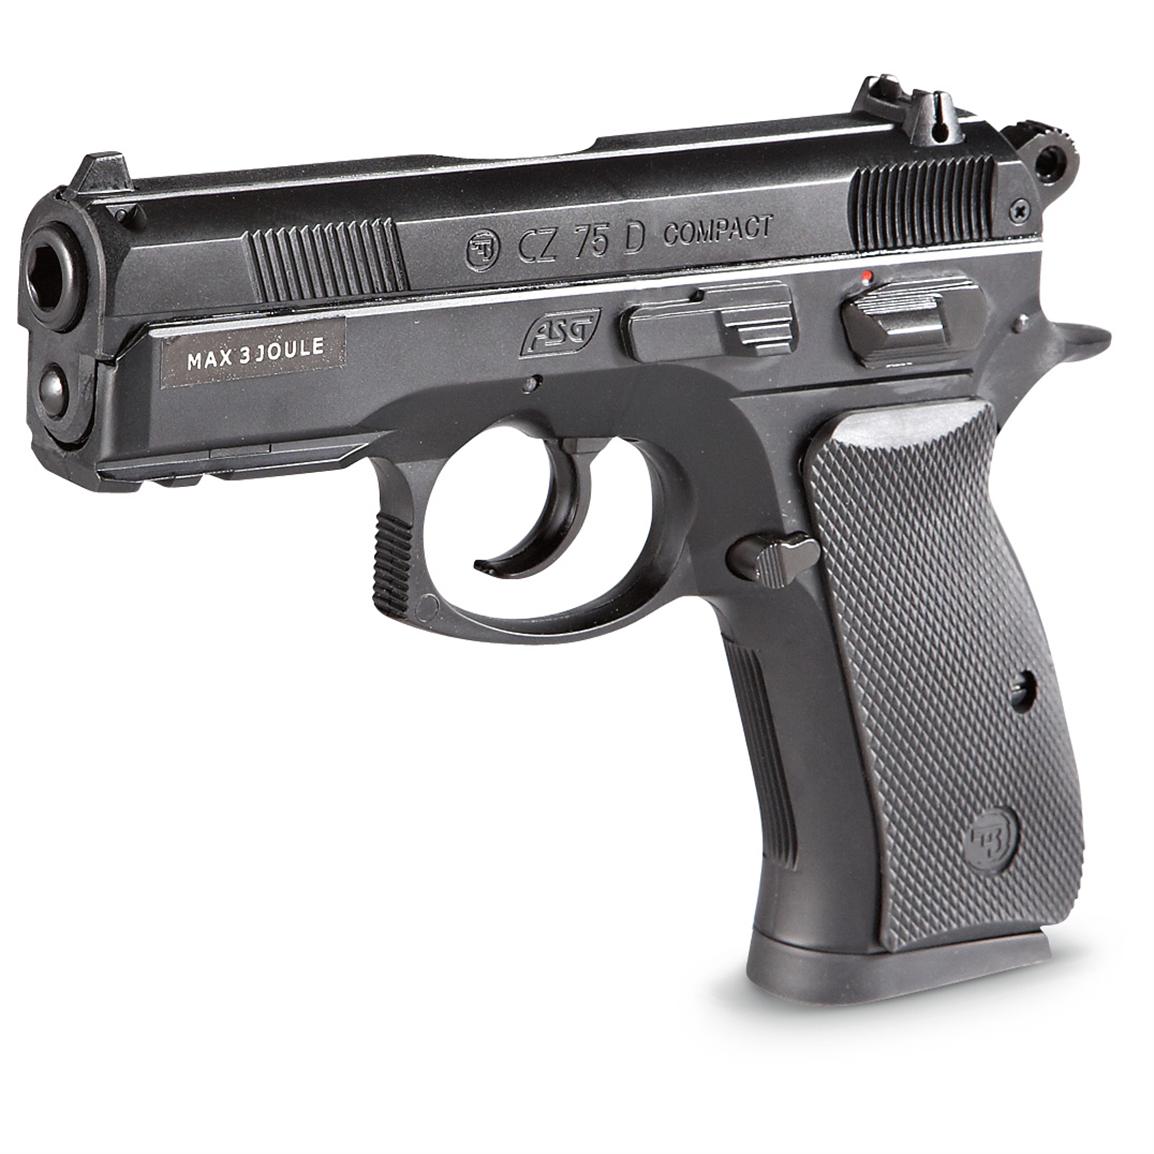 Aftermath® CZ 75D Compact 4.5mm / .177 CO2 Air Pistol - 223829, Air & BB Pistols at Sportsman's ...